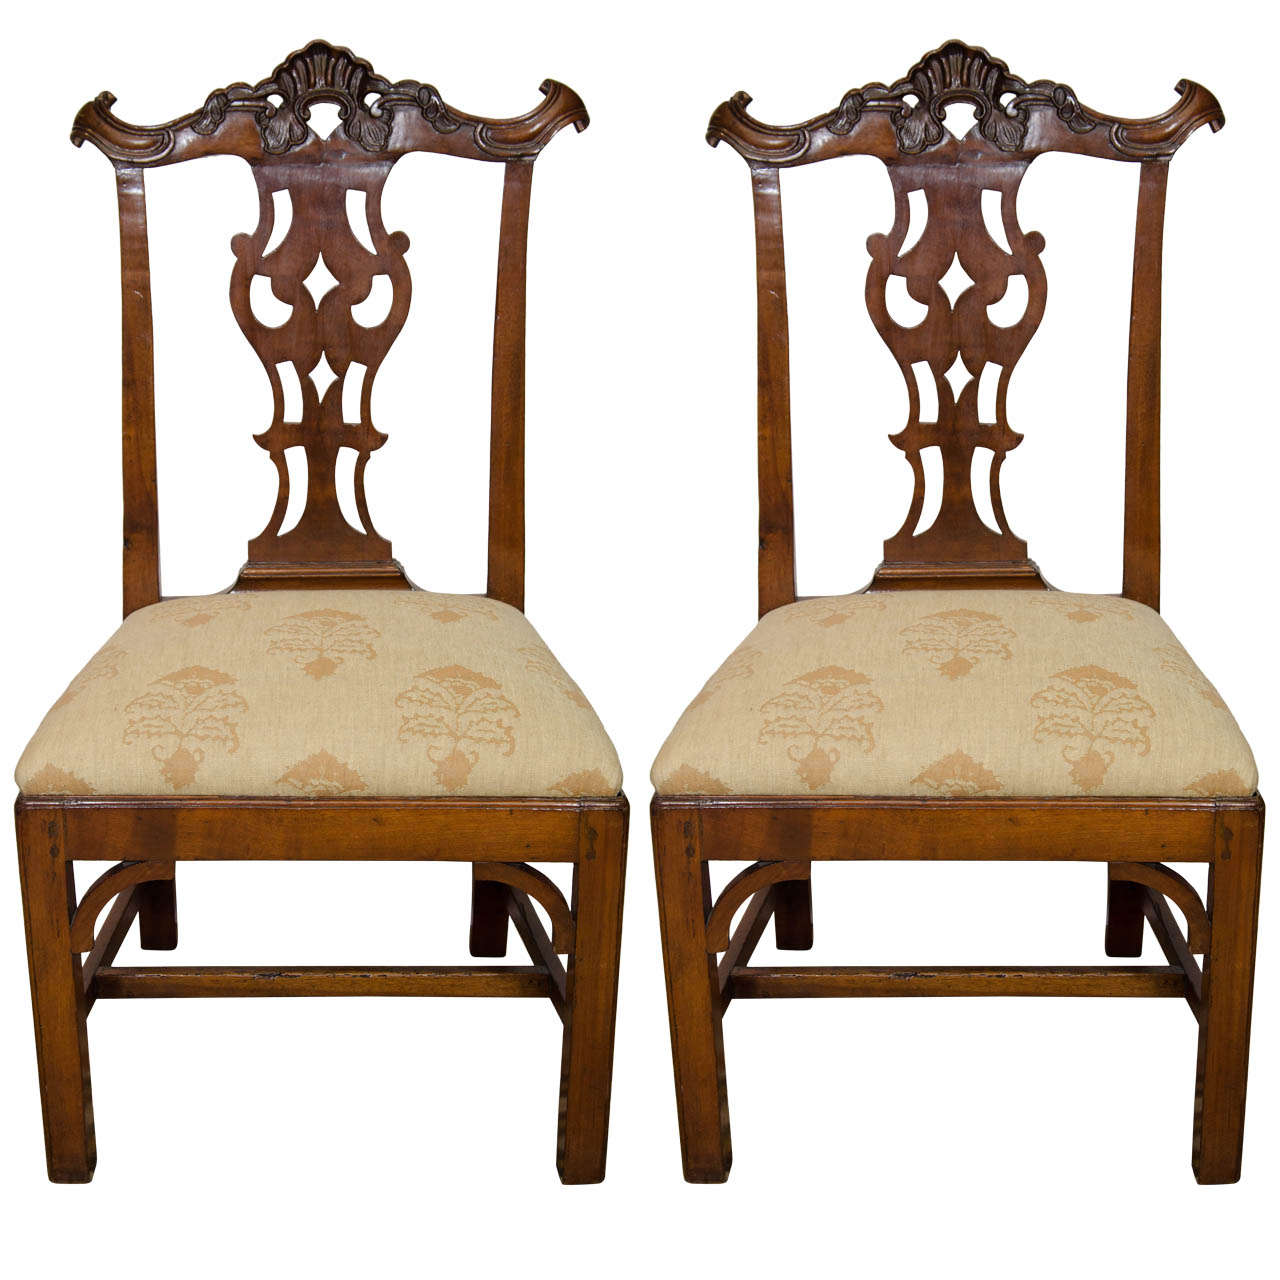 Pair of Portuguese Colonial Side Chairs